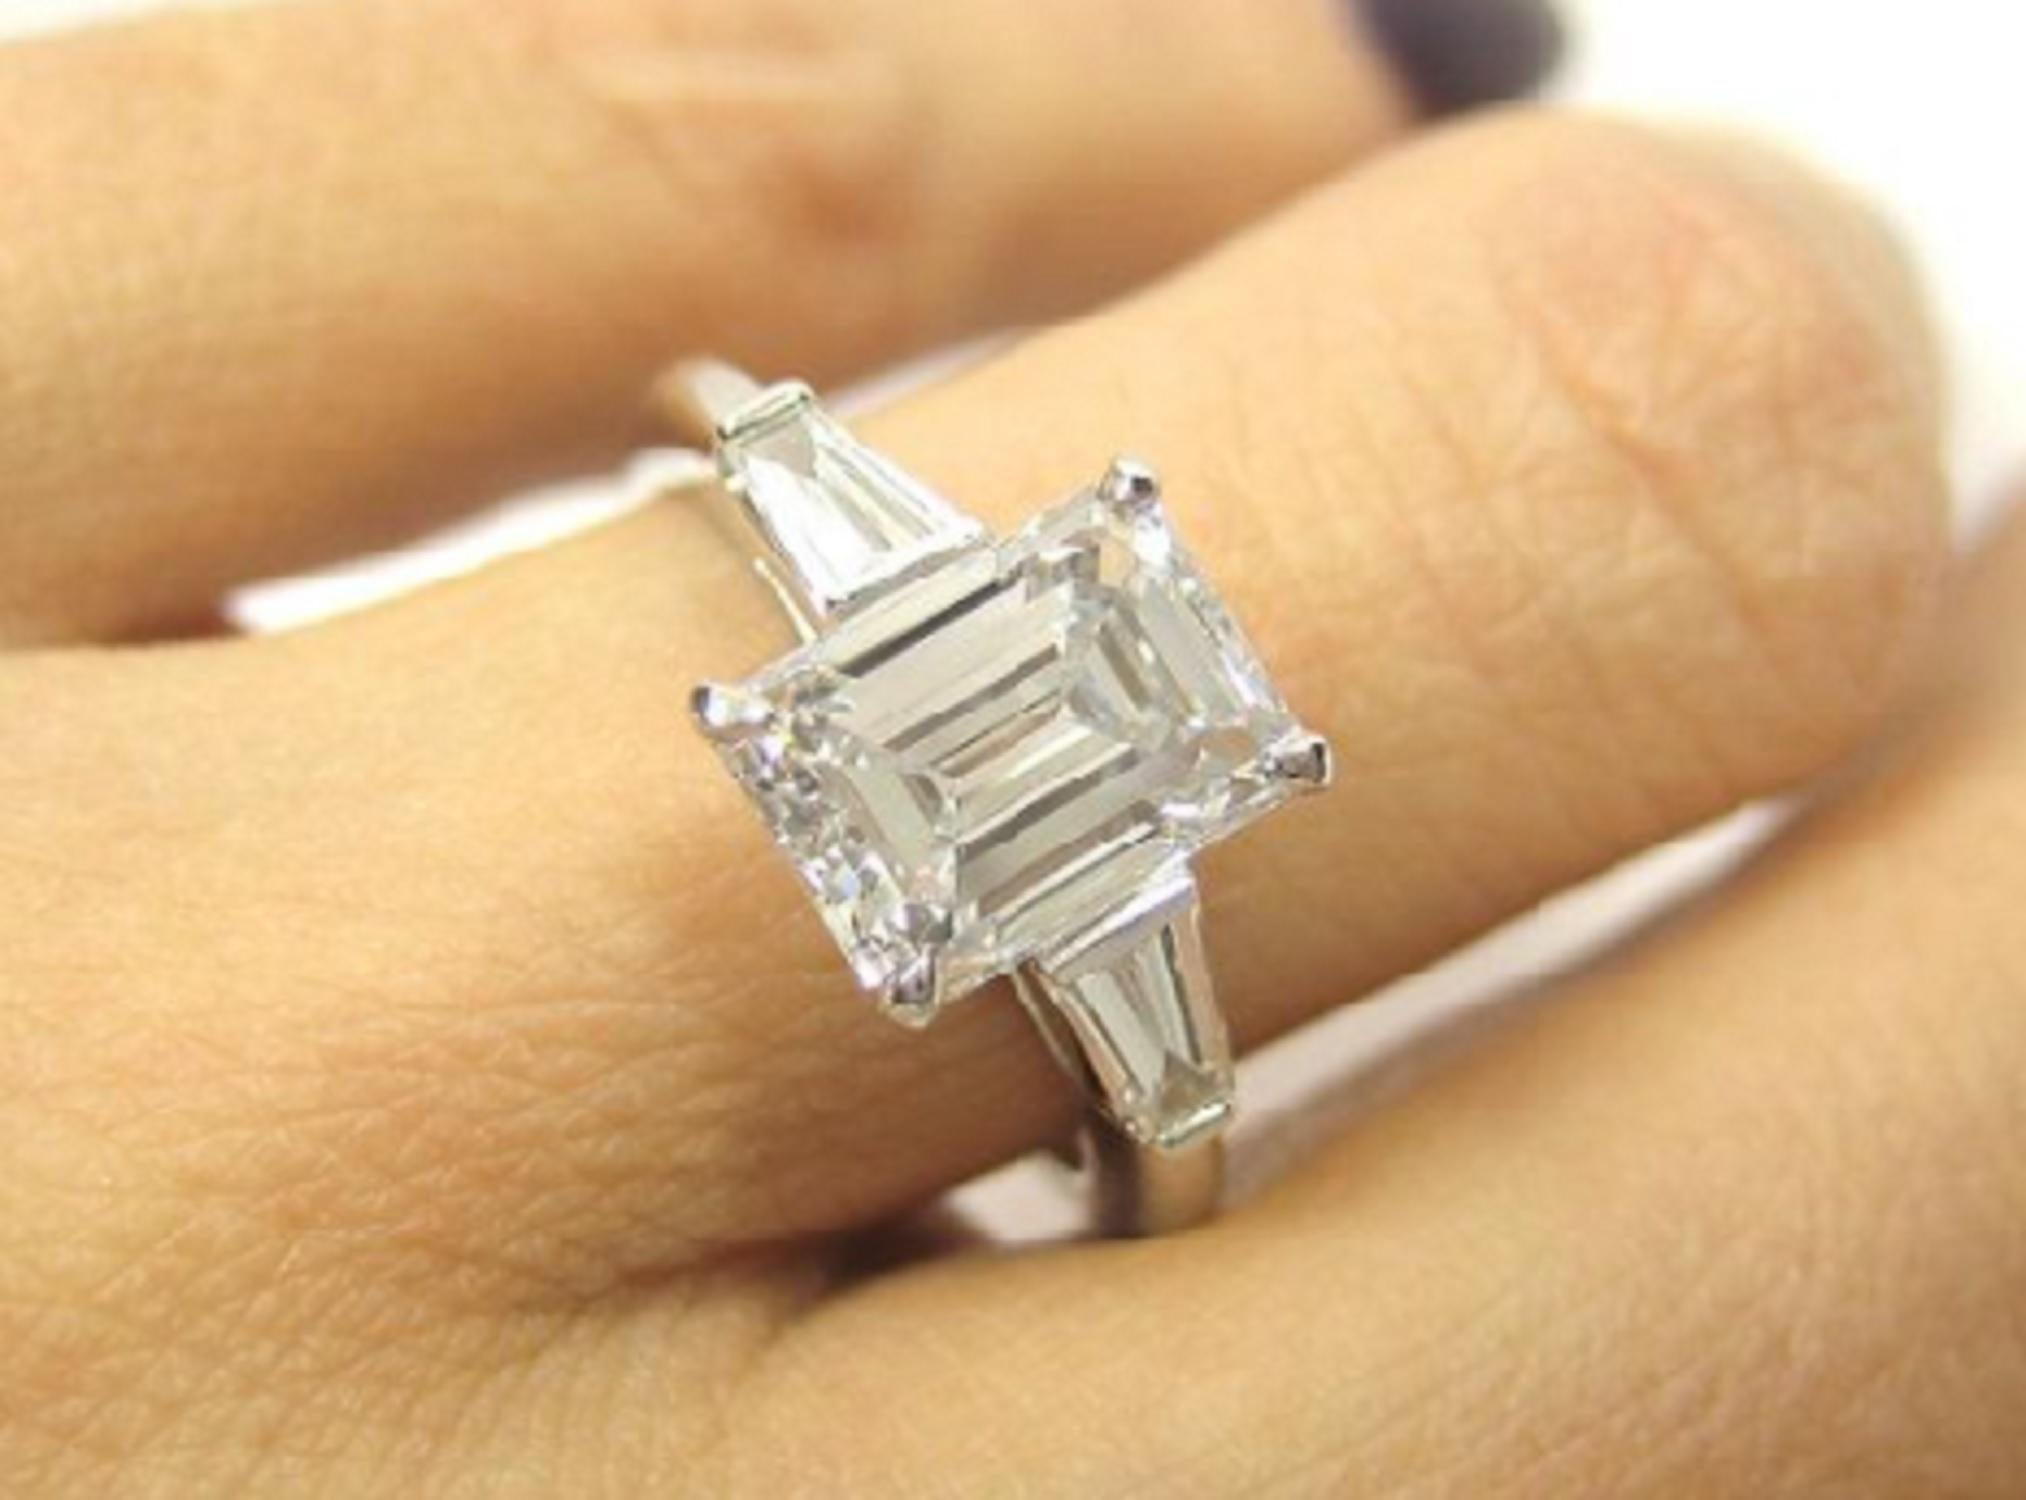 An exquisite emerald cut diamond ring composed by a very pure 2.30 carat emerald cut diamond that is actually bigger than a regular 2.30 carat weight.

The ring has been handmade in Italy in solid platinum with side tapered baguettes and is